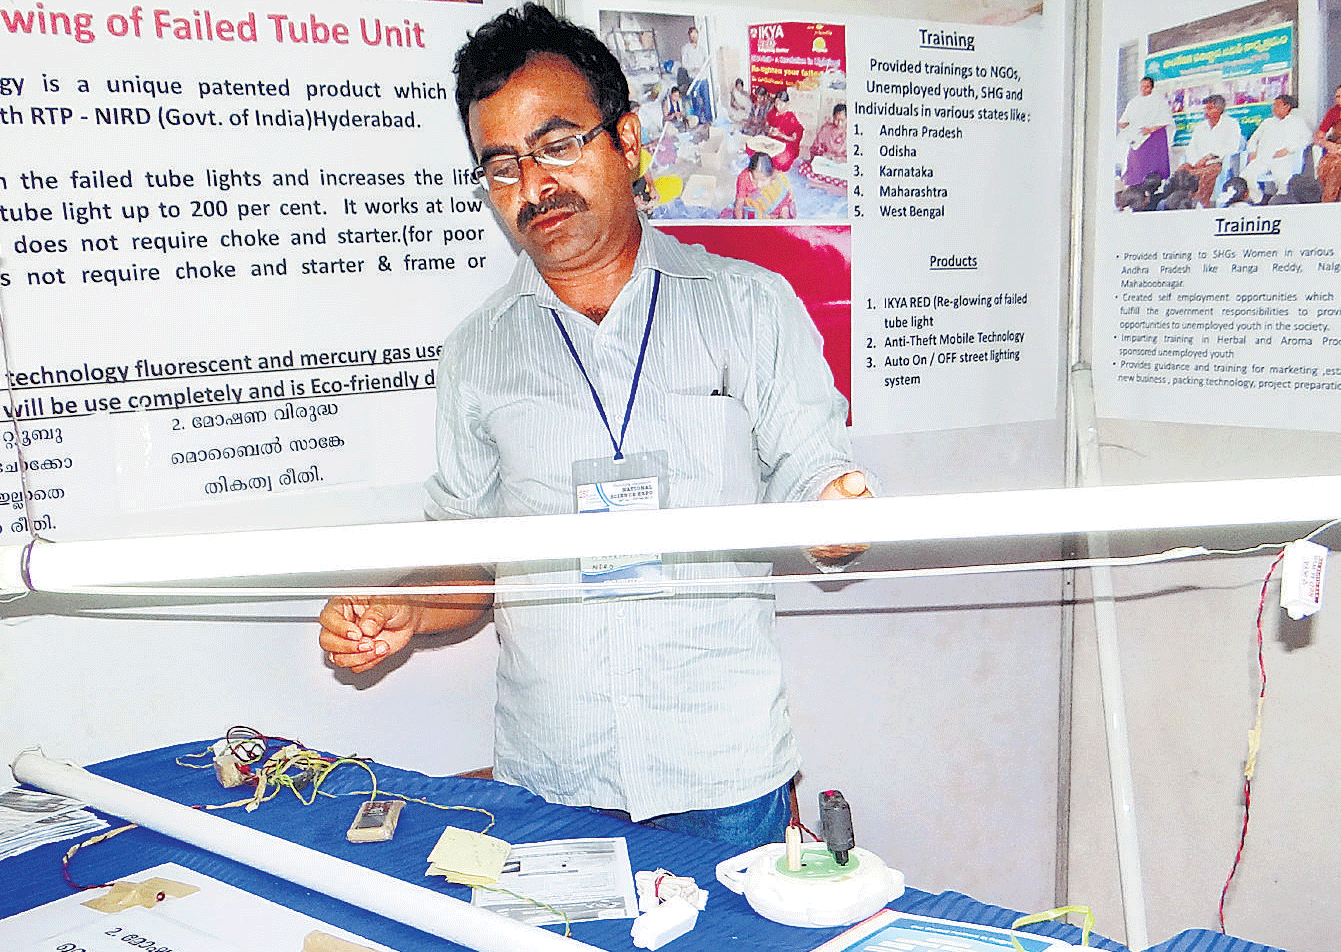 TECHNOLOGY OF RELEVANCE: M Narasimhachary demonstrates his patented IKYA-ReD technology to relight malfunctioning tubelights at the 25th Kerala Science Congress Expo held in Thiruvananthapuram. The National Innovation Council of India plans to set aside Rs 5,000 crore to fund grassroots innovations in India.